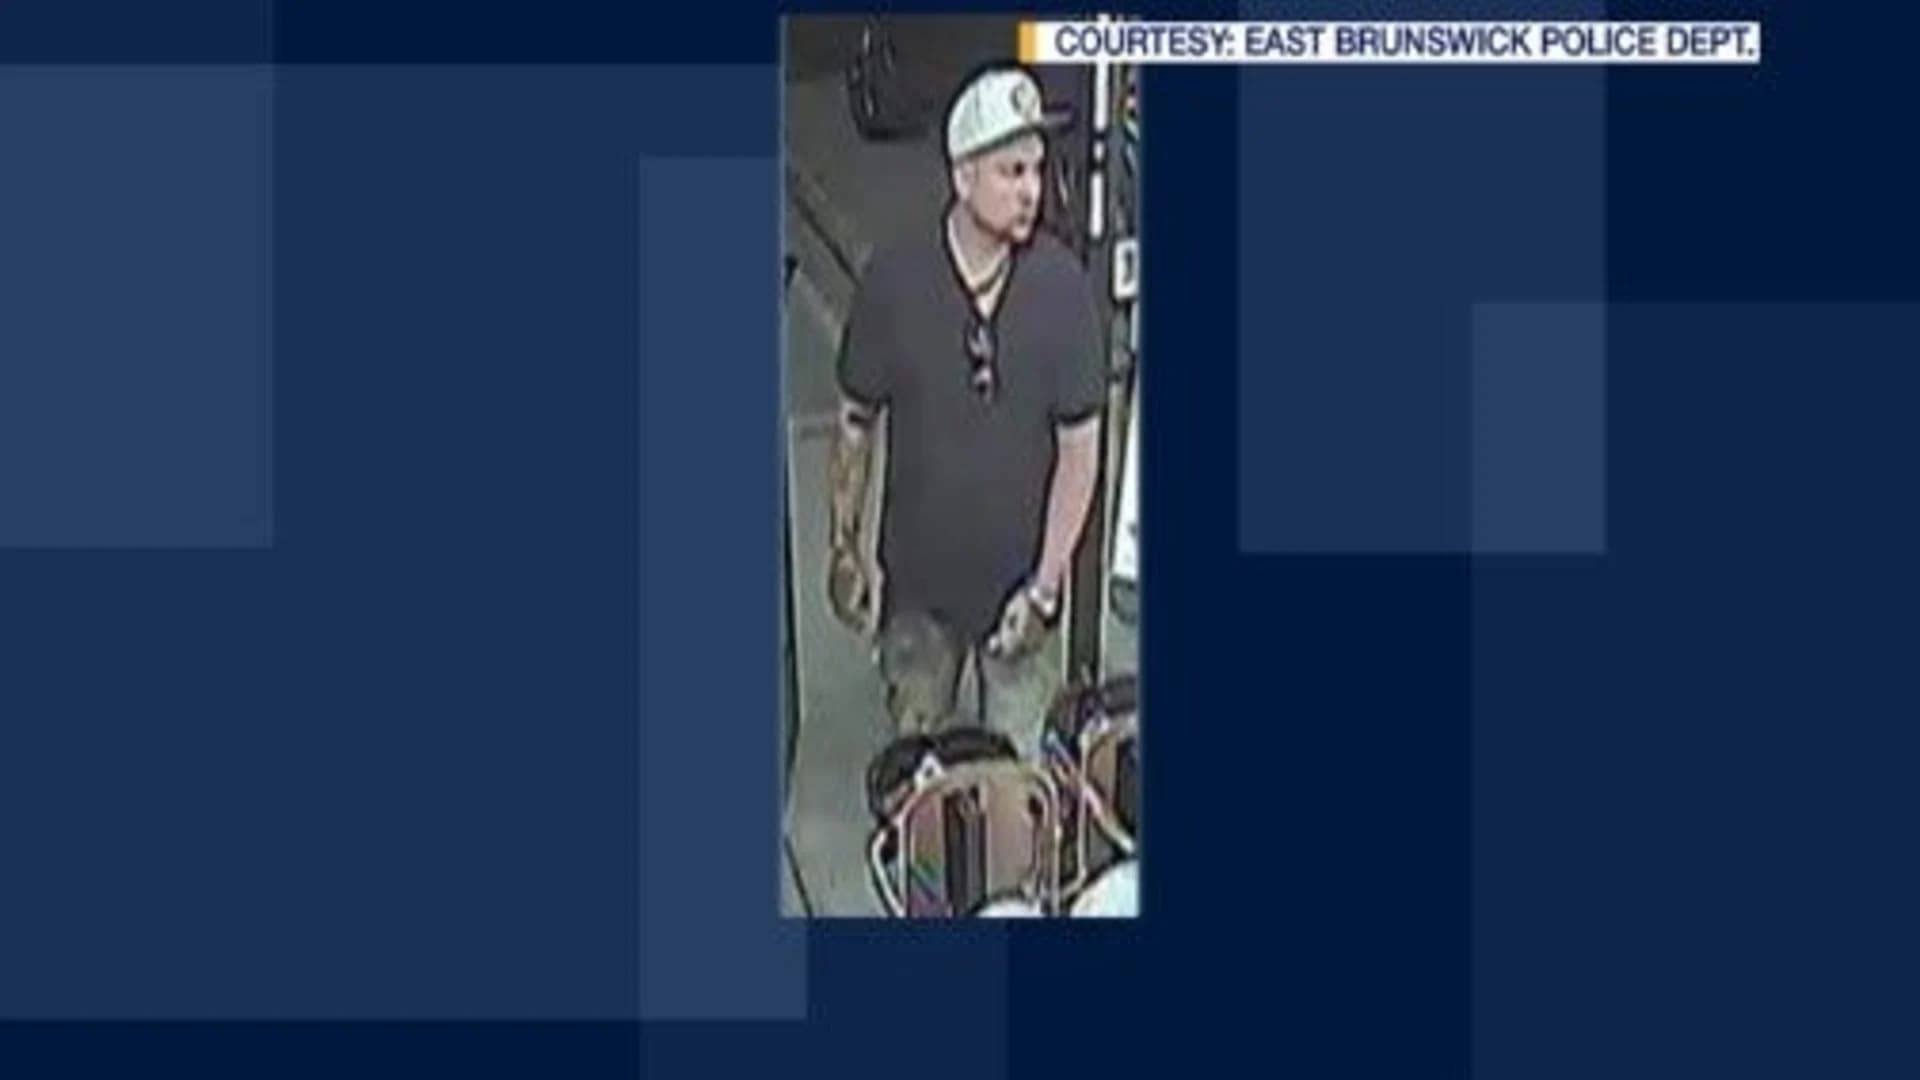 Police: Man stole donation box chained to counter in East Brunswick